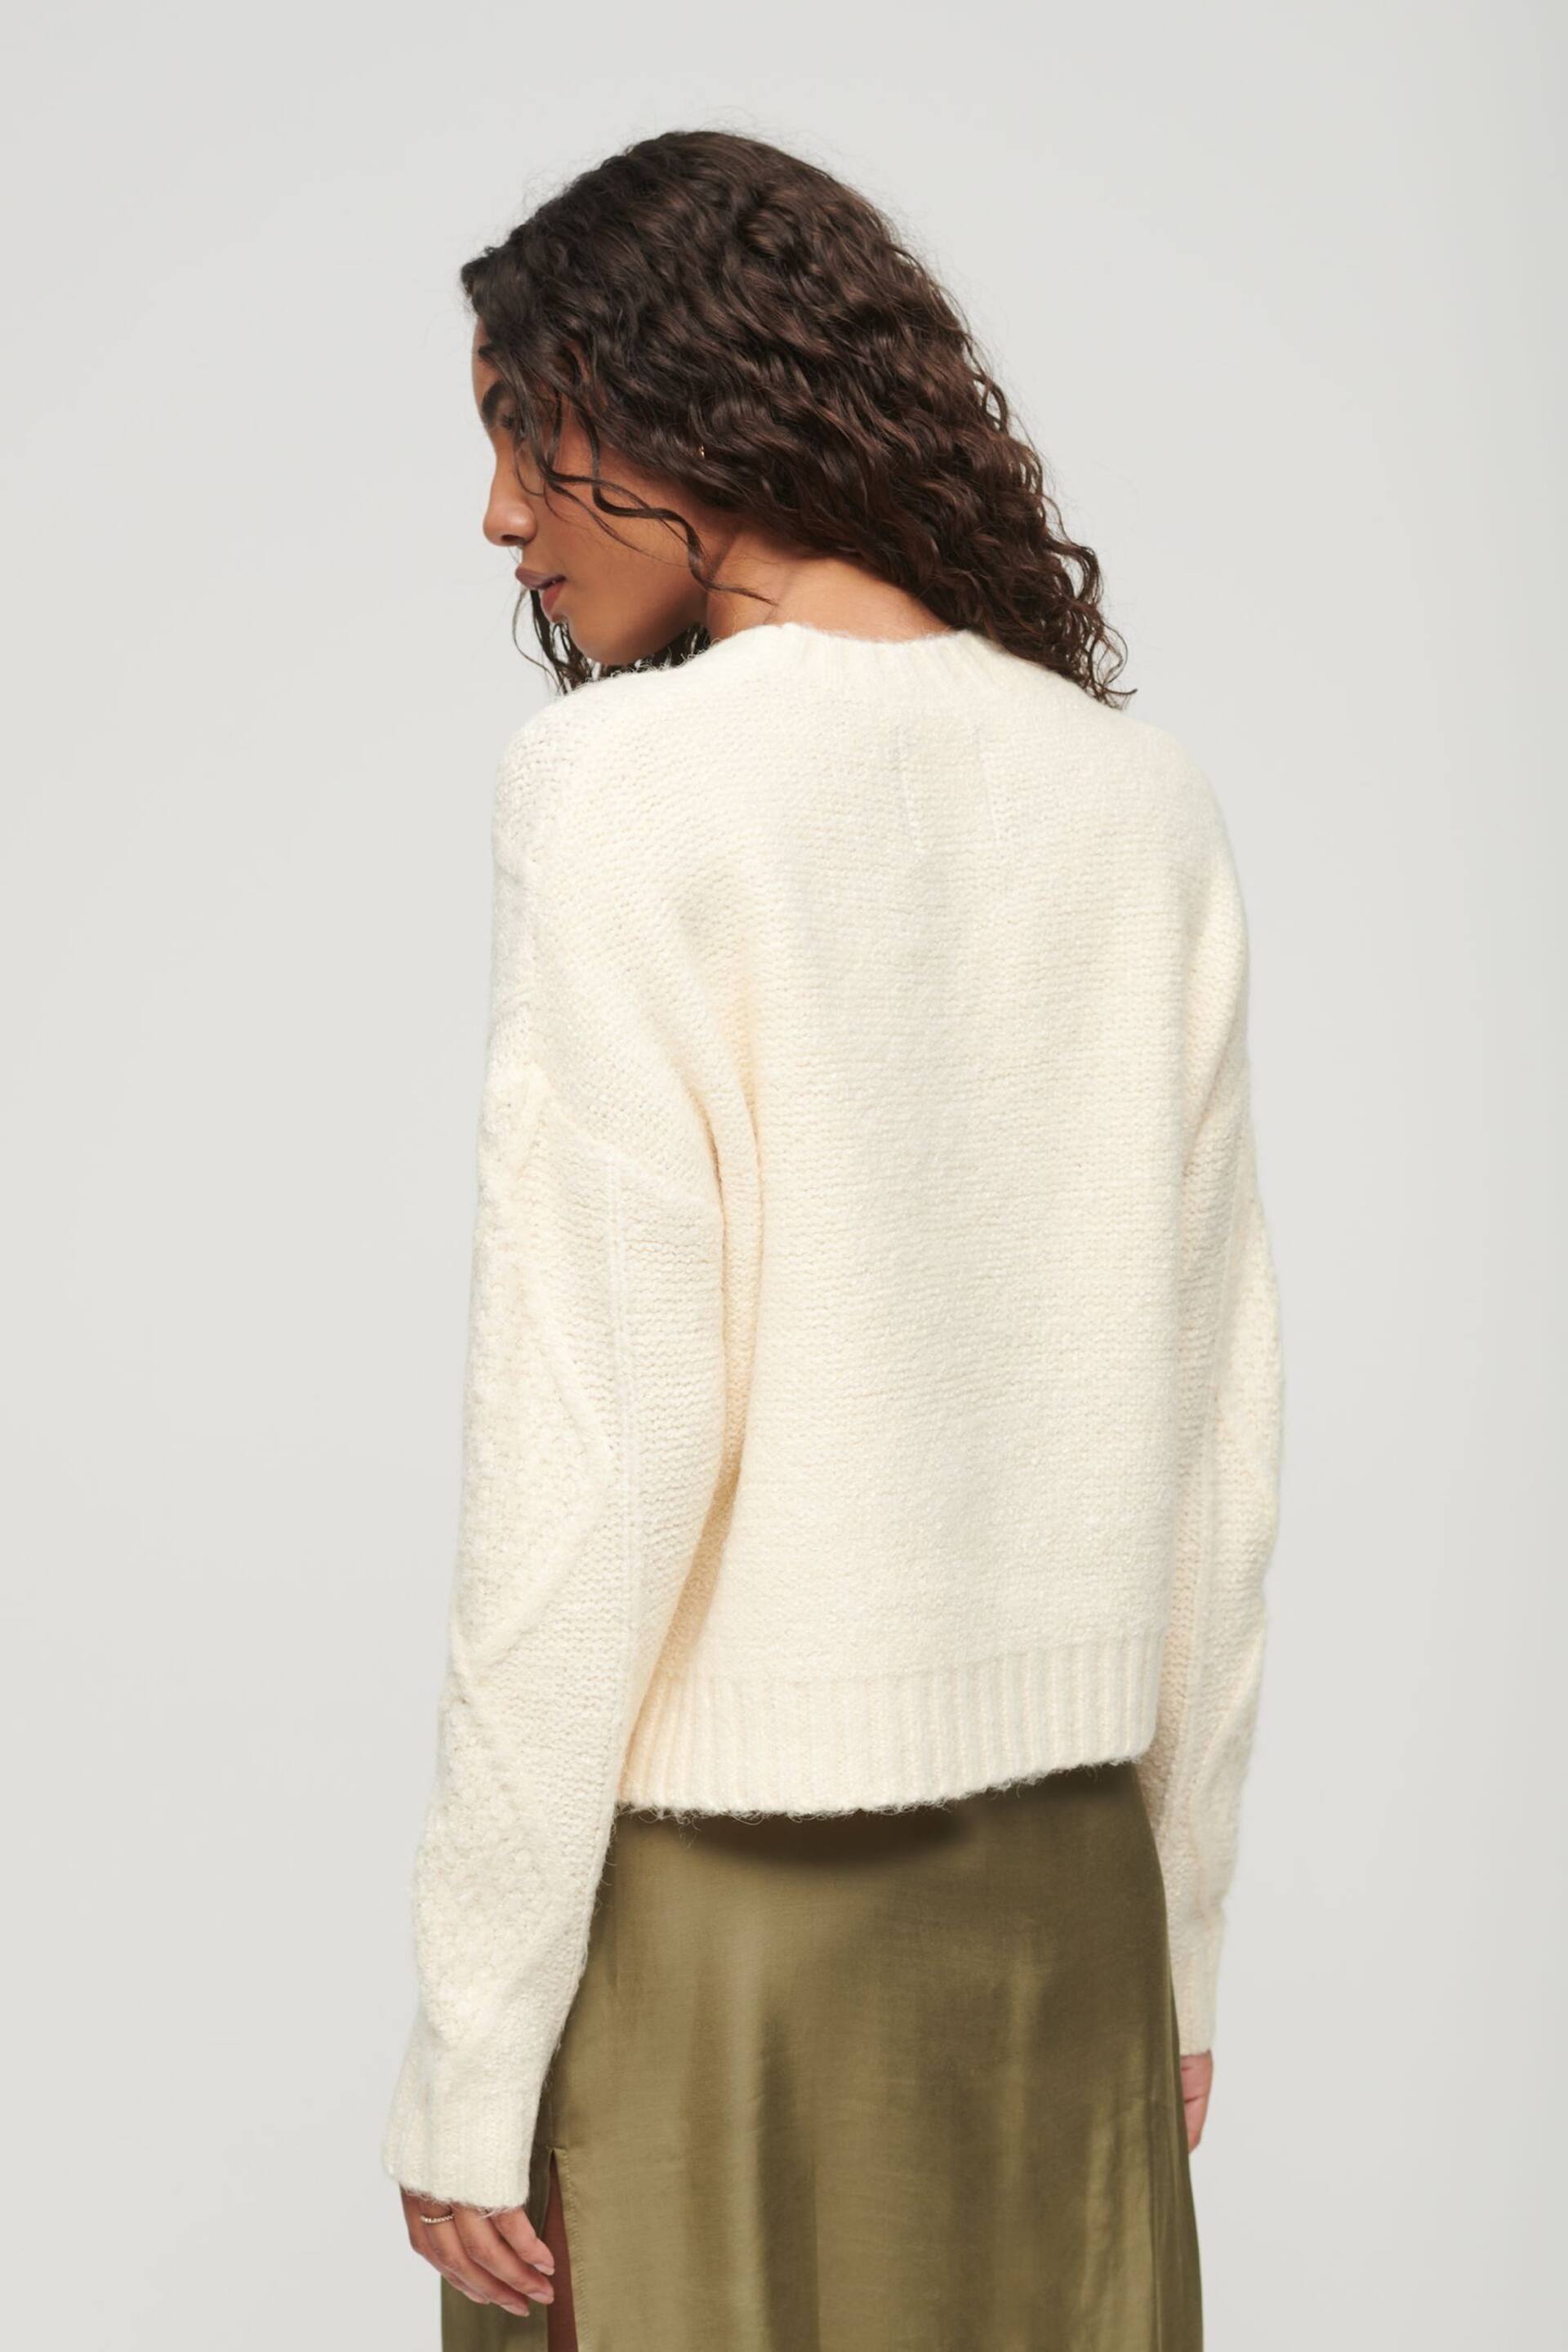 Superdry White Chunky Cable Knitwear Jumper - Image 2 of 6